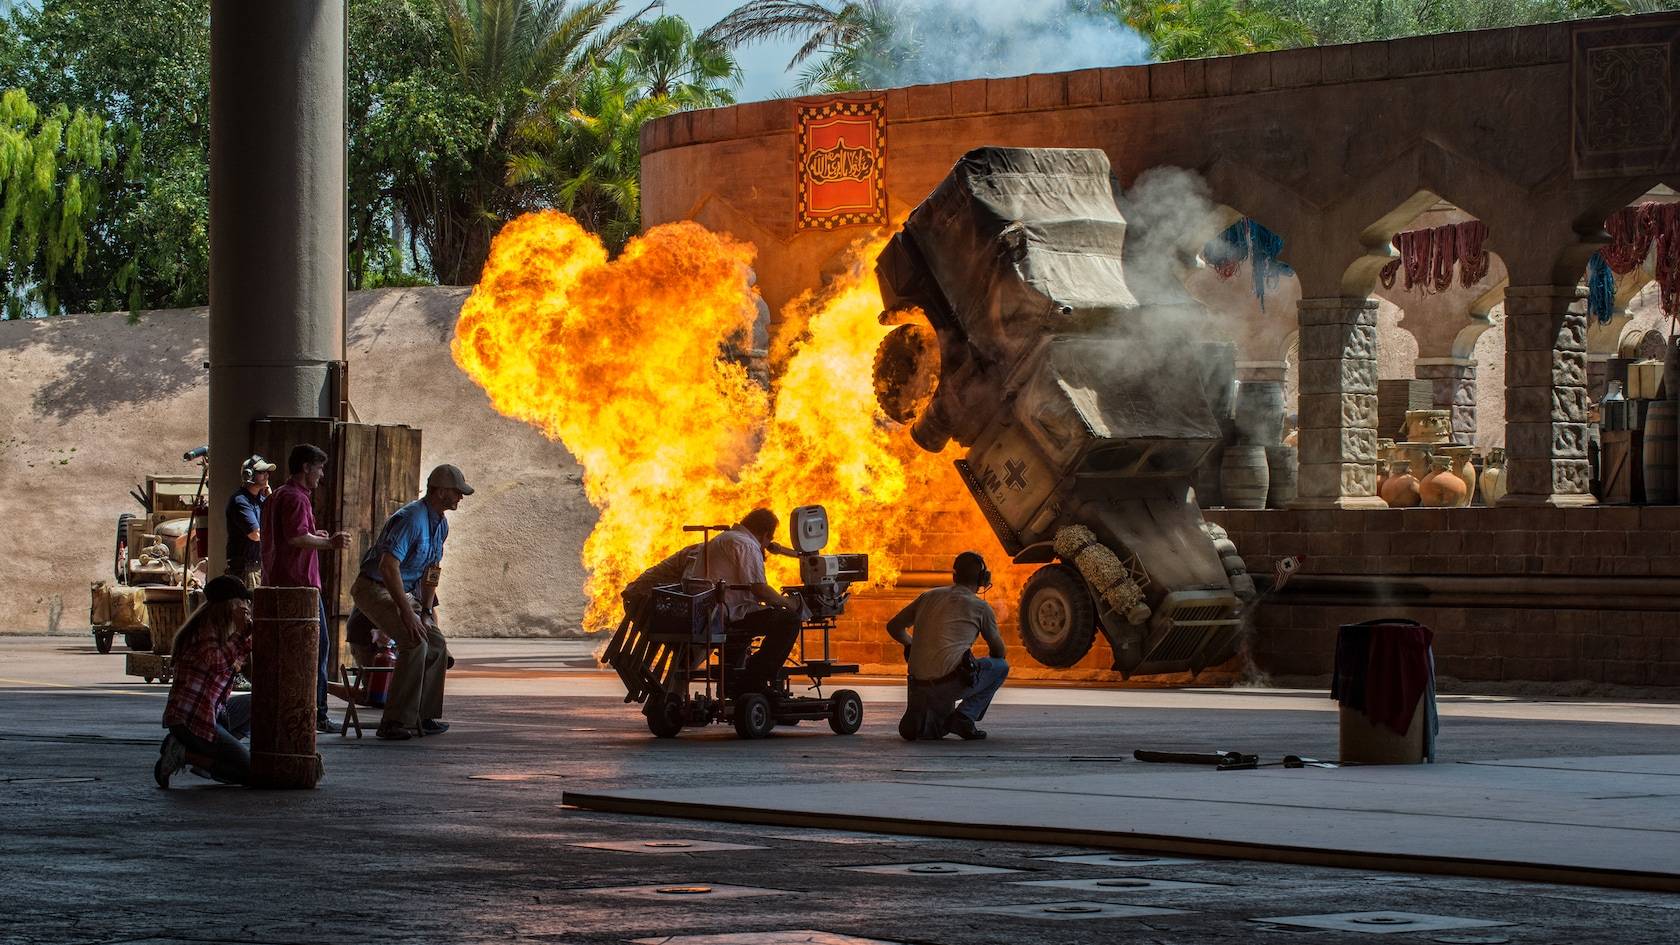 Indiana Jones Epic Stunt Spectacular! to remain closed on Wednesday 19 August